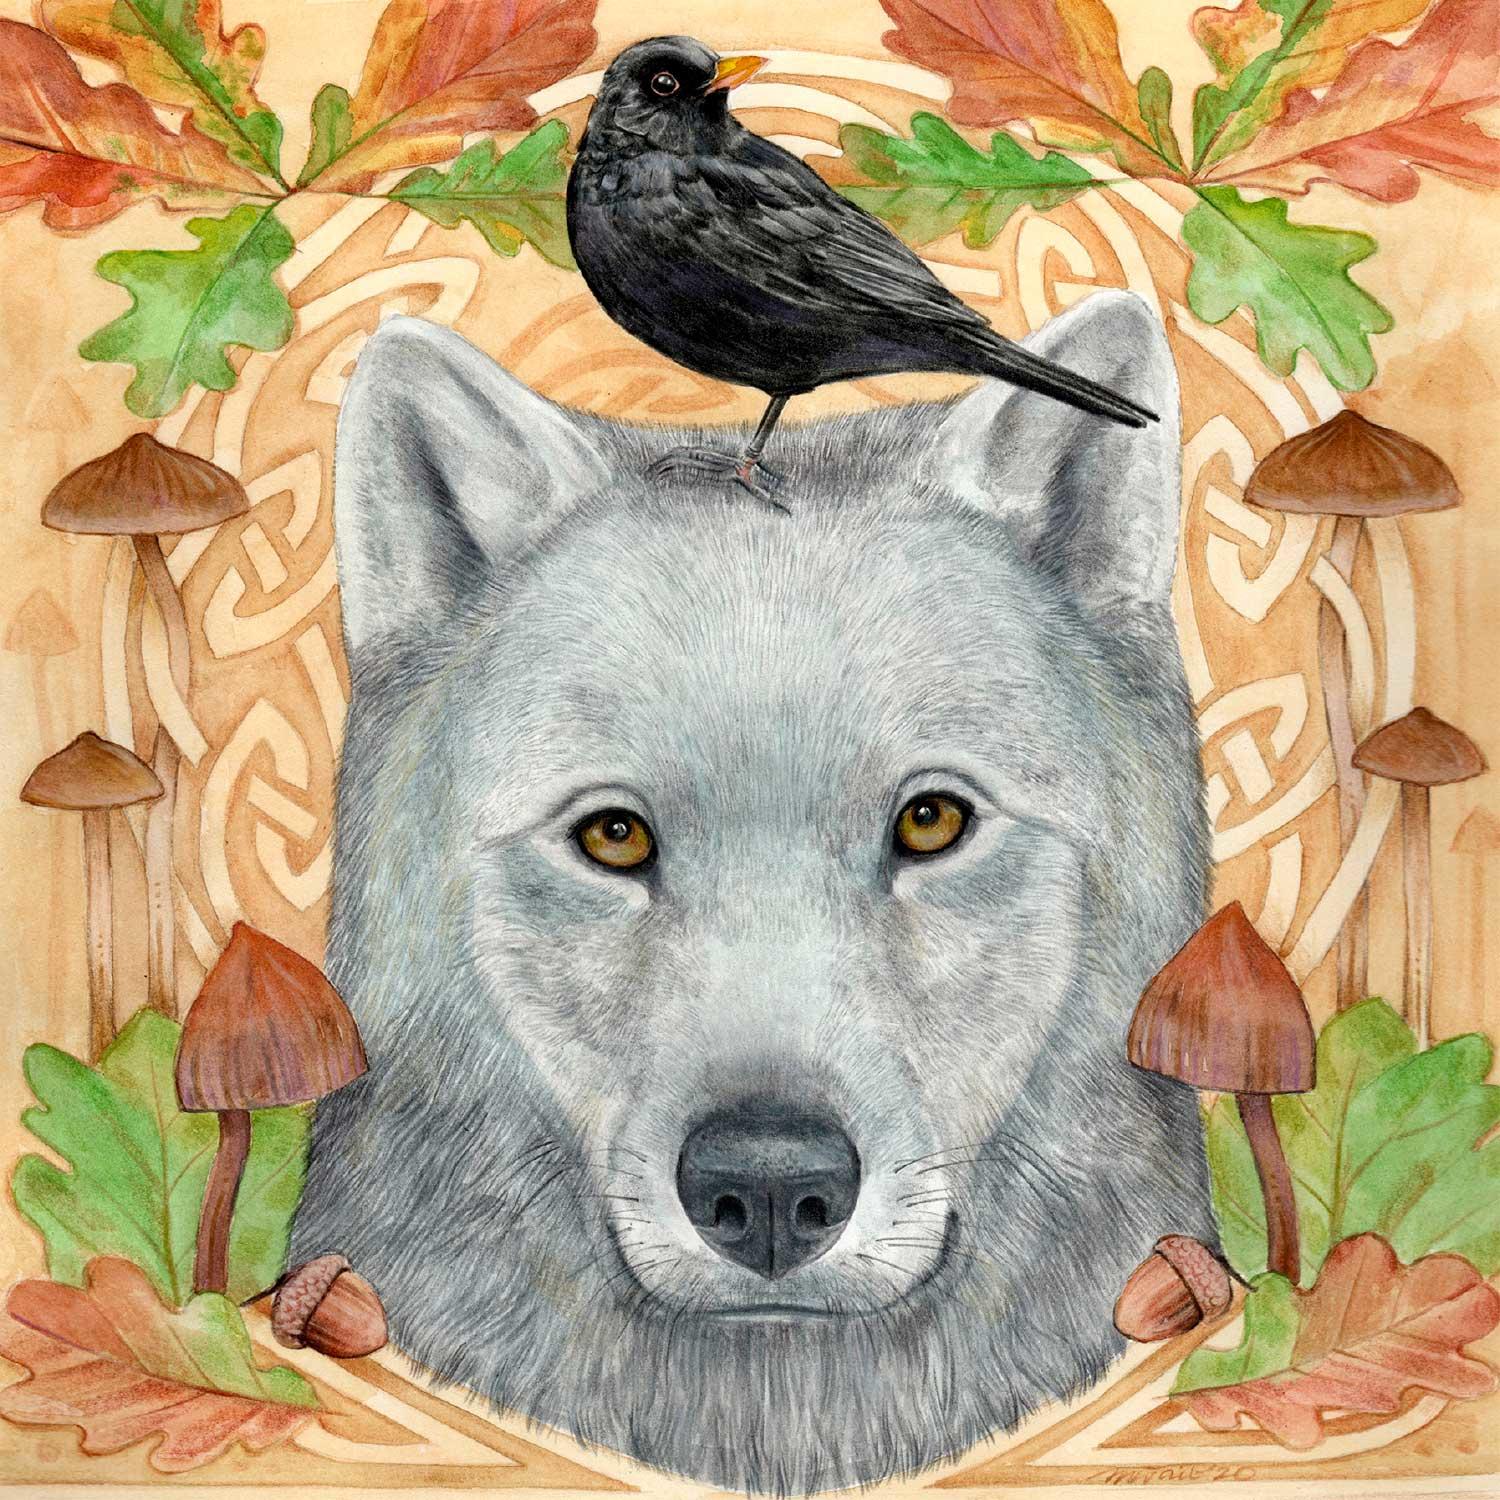 Wolf and Blackbird by artist Marjory Tait